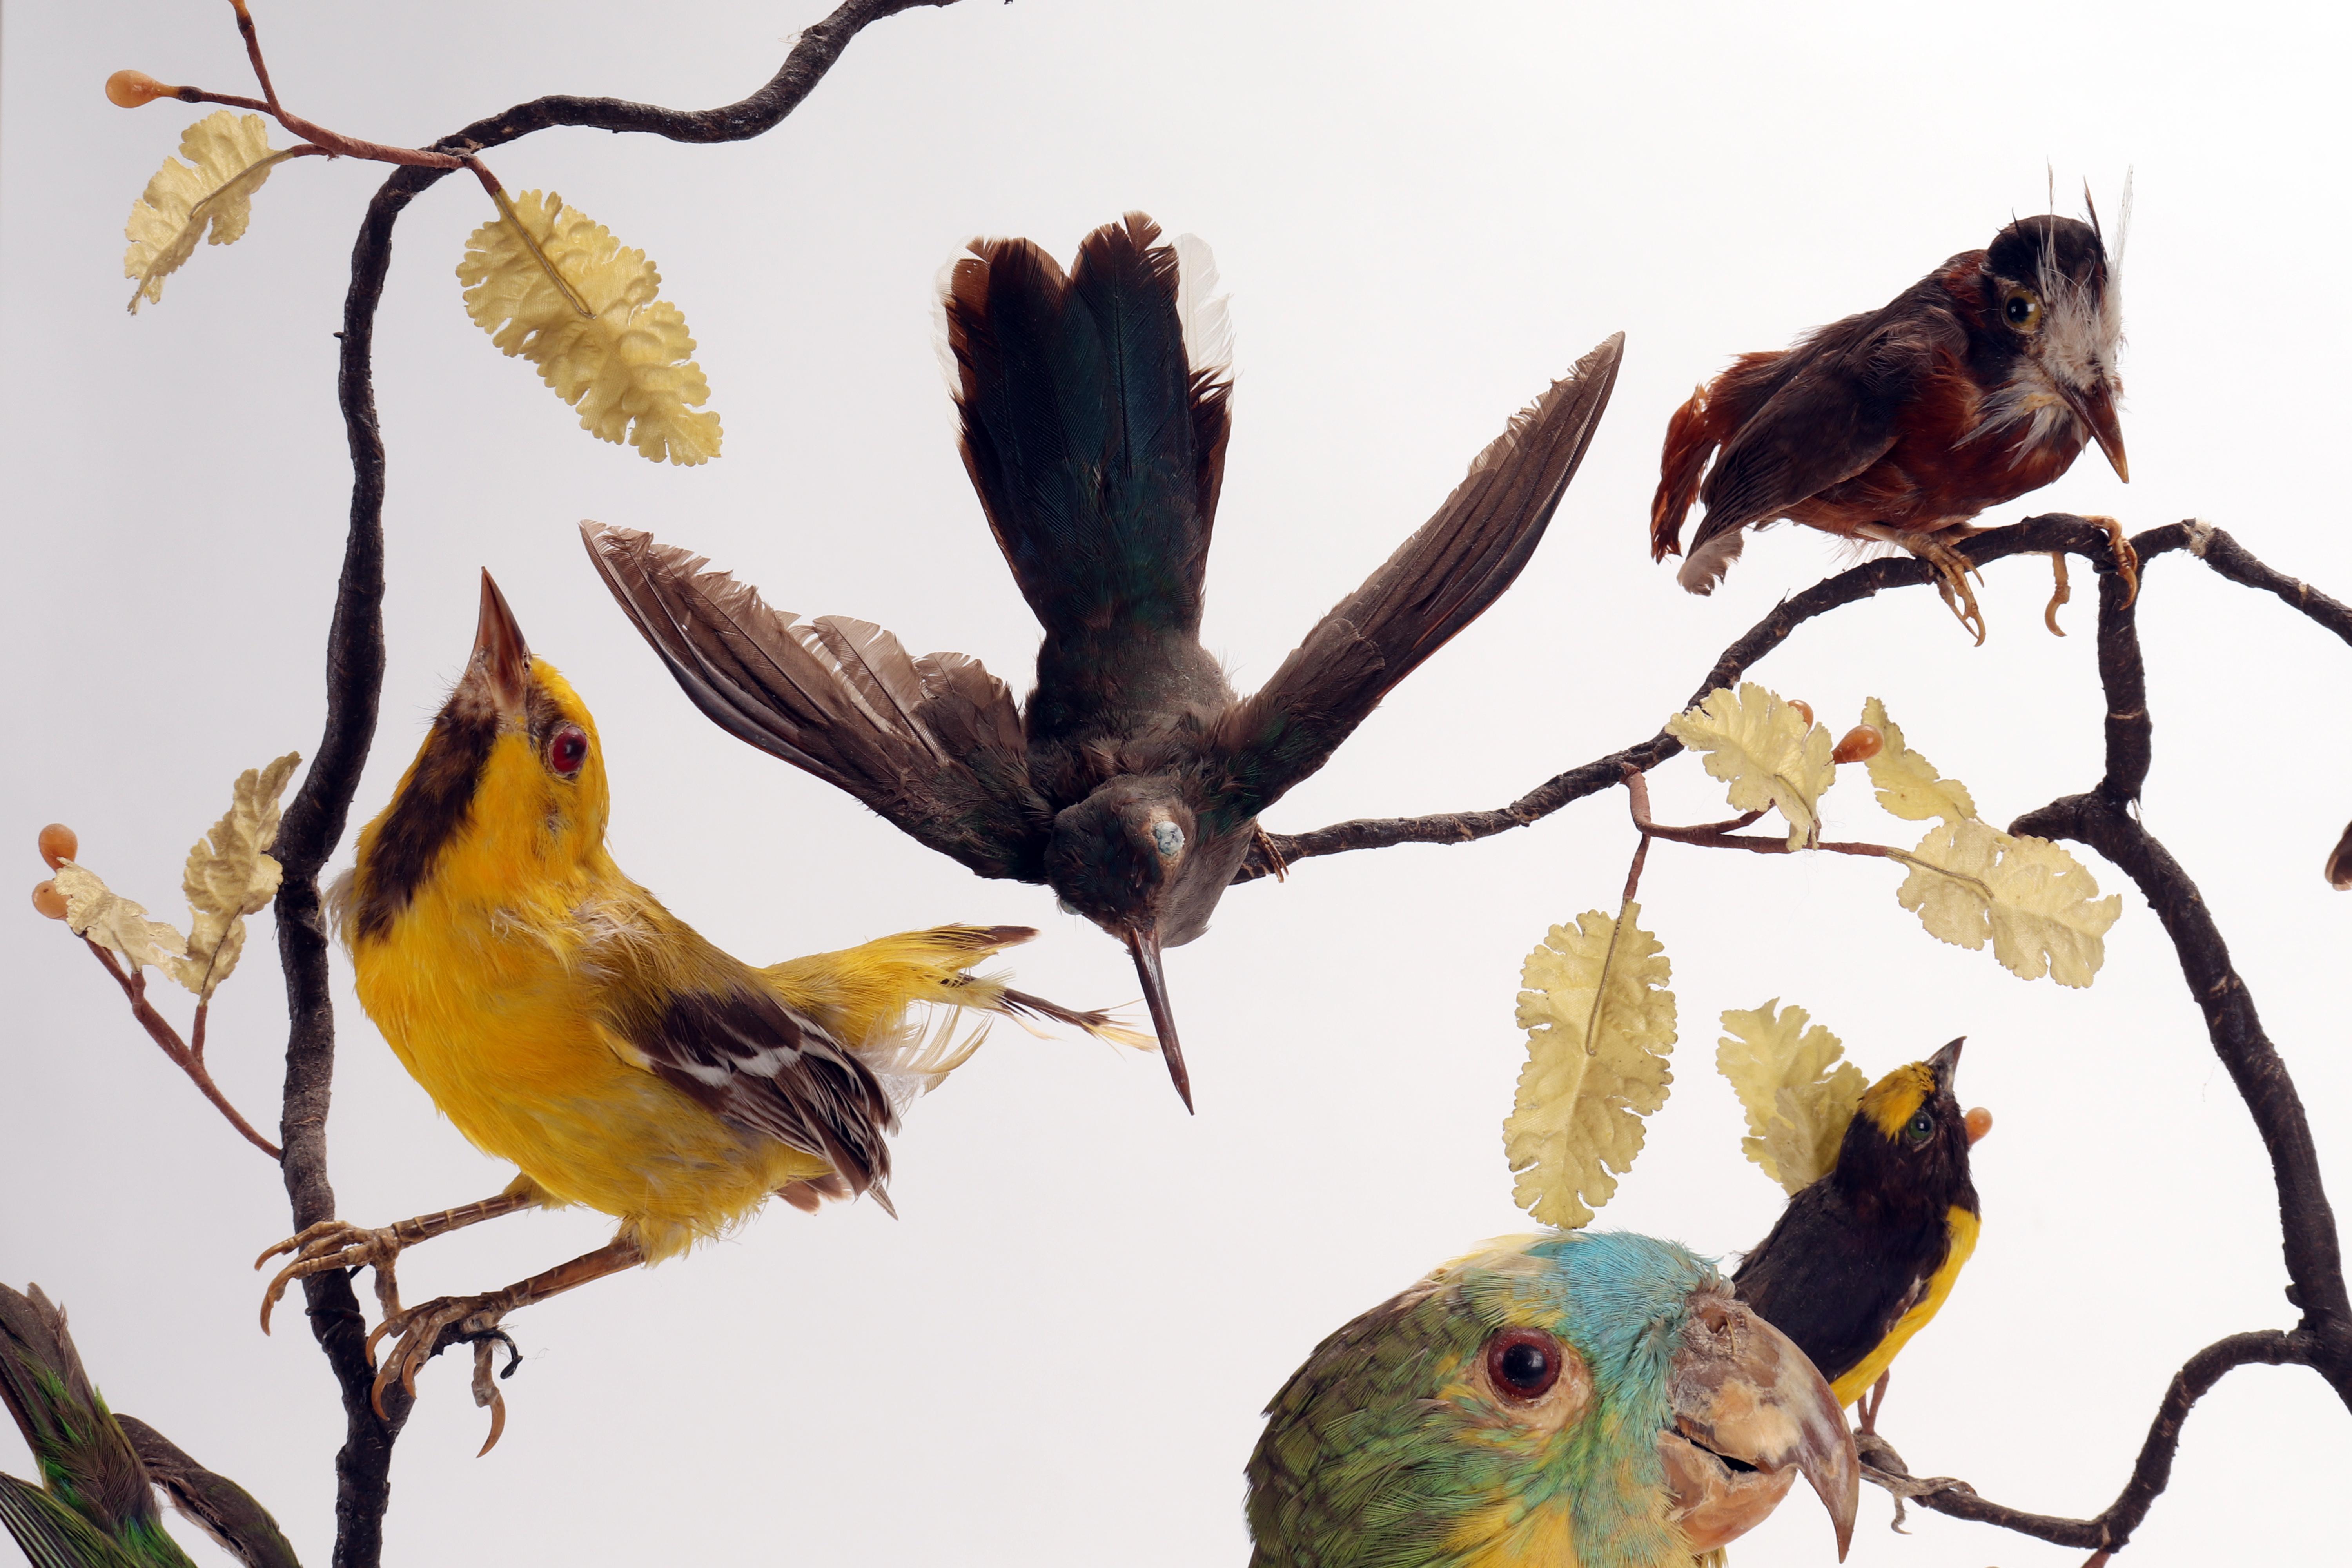 Animal Skin Wunderkammer Diorama: a Parrot and Other 13 Birds, London, 1880